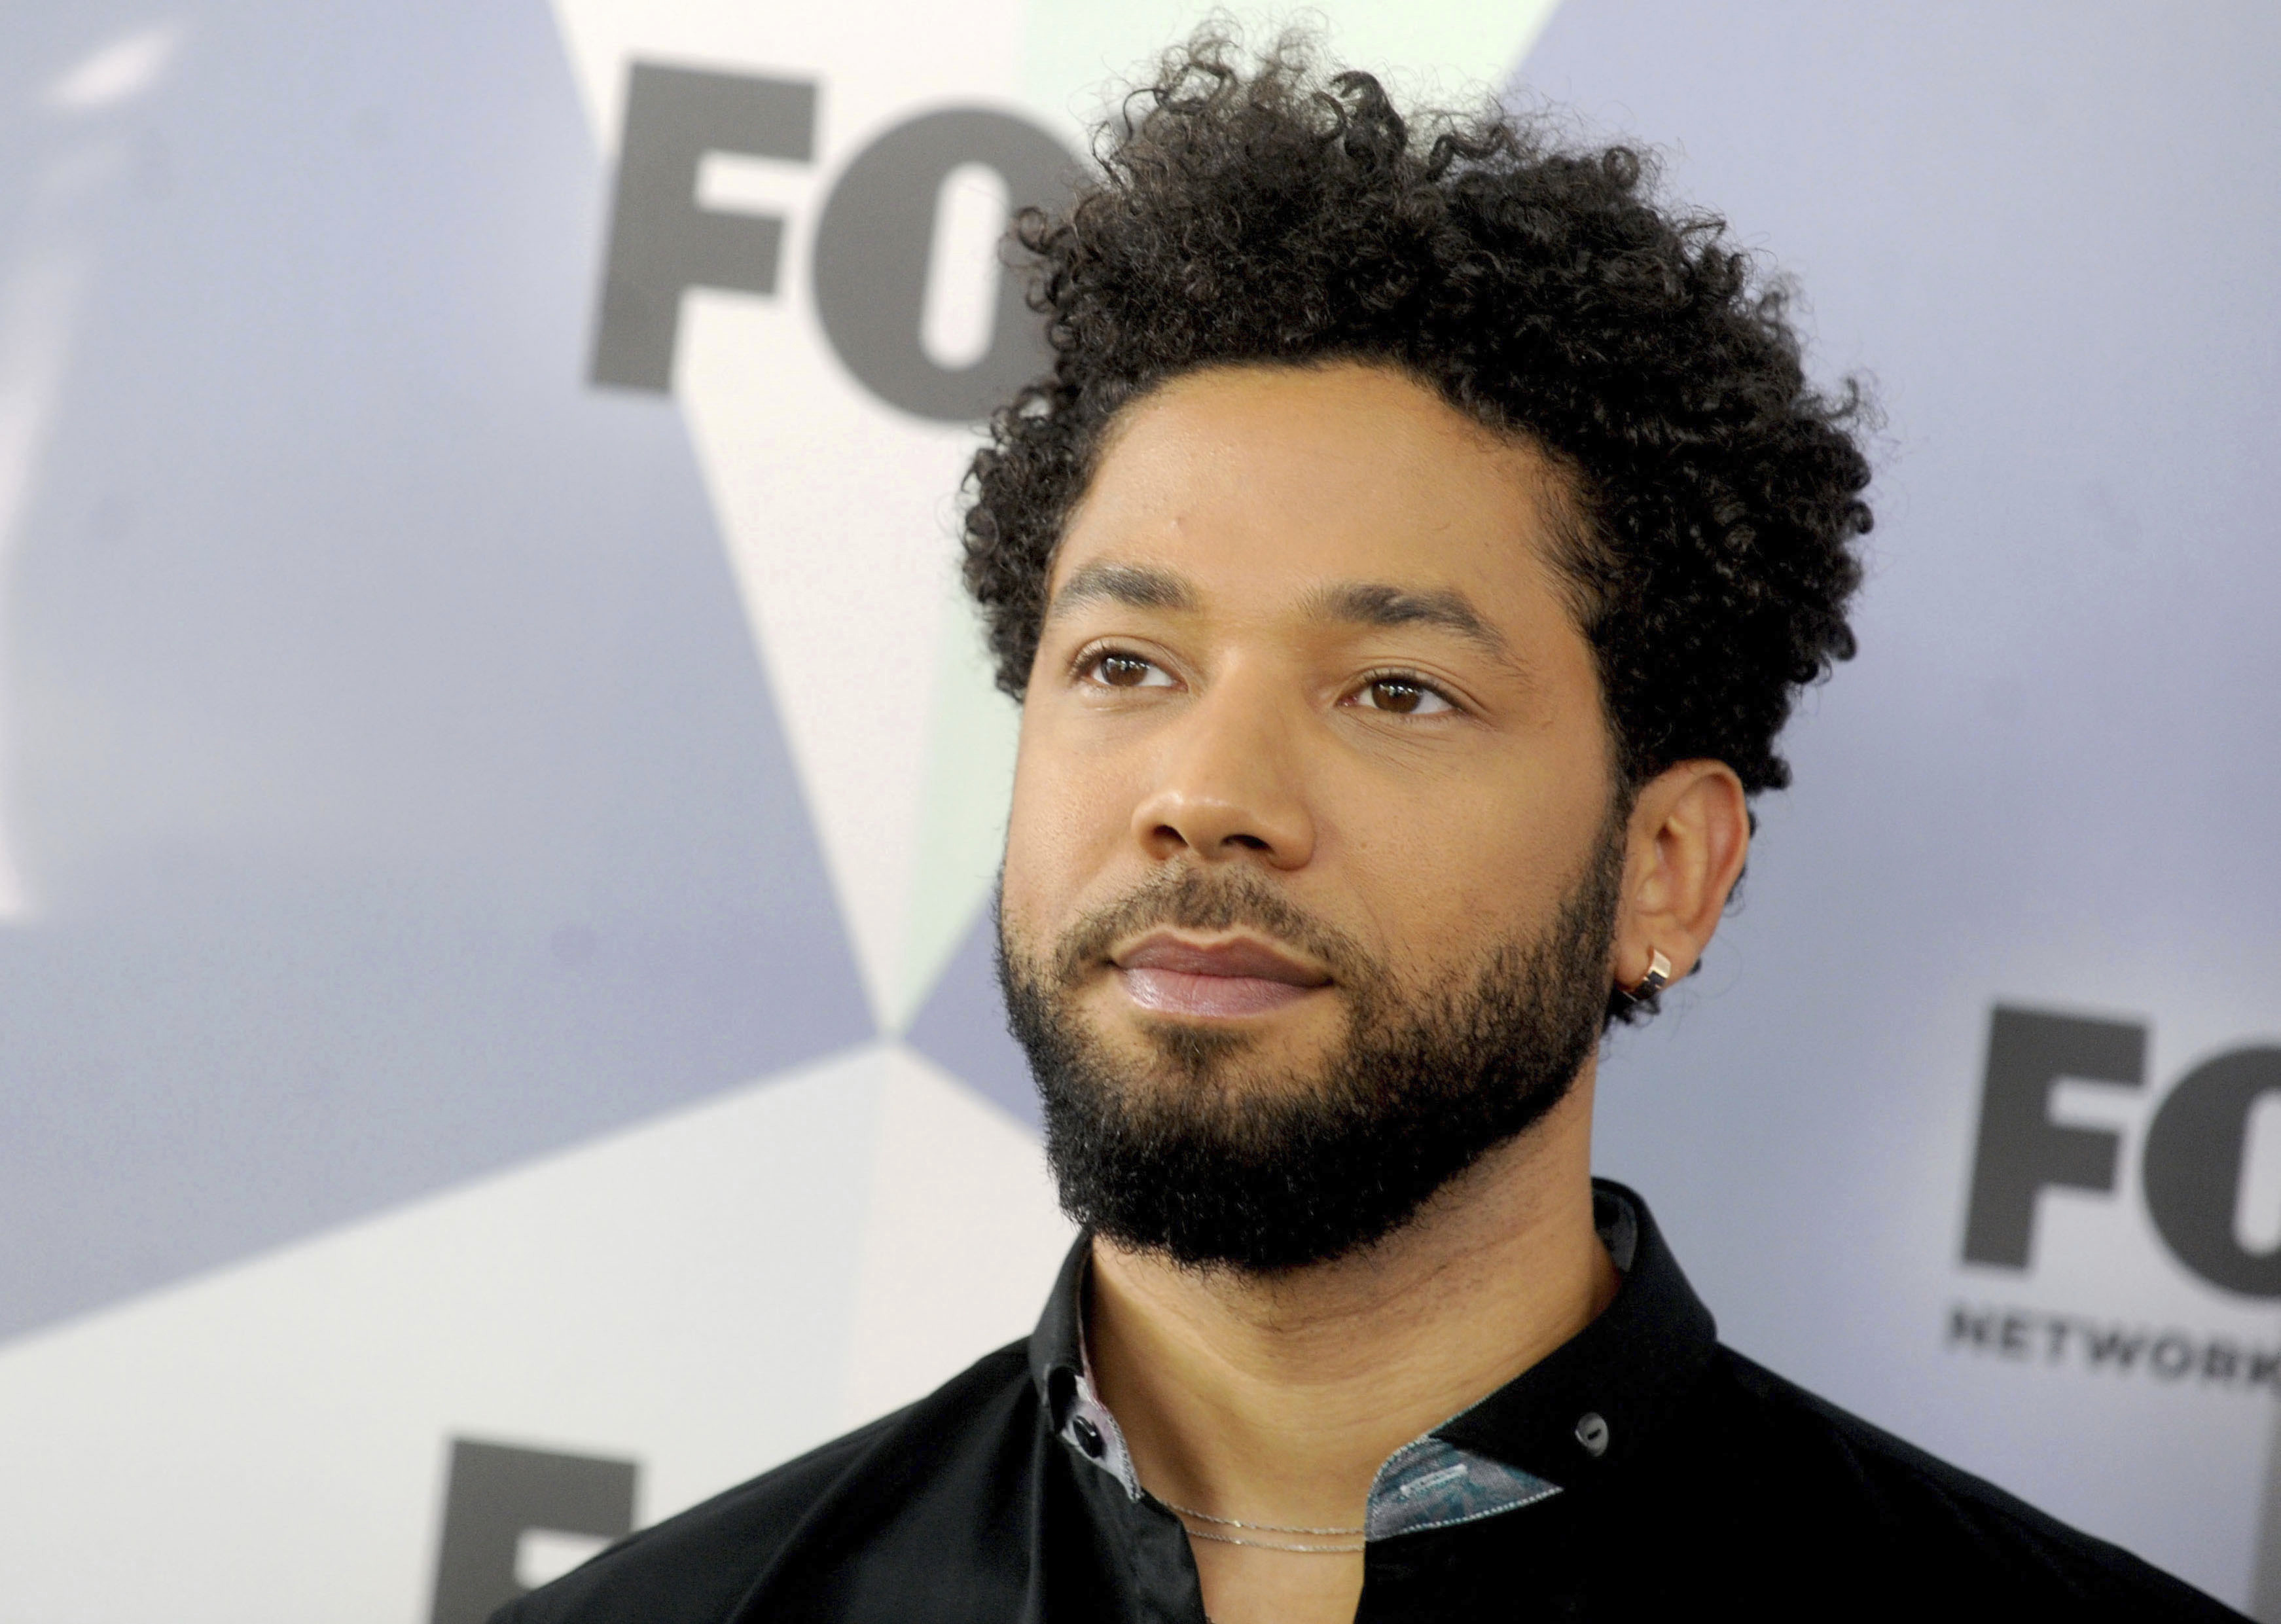 Jussie Smollett Dropped from Empire; Dems Back Reparations for Slavery Ahead of 2020